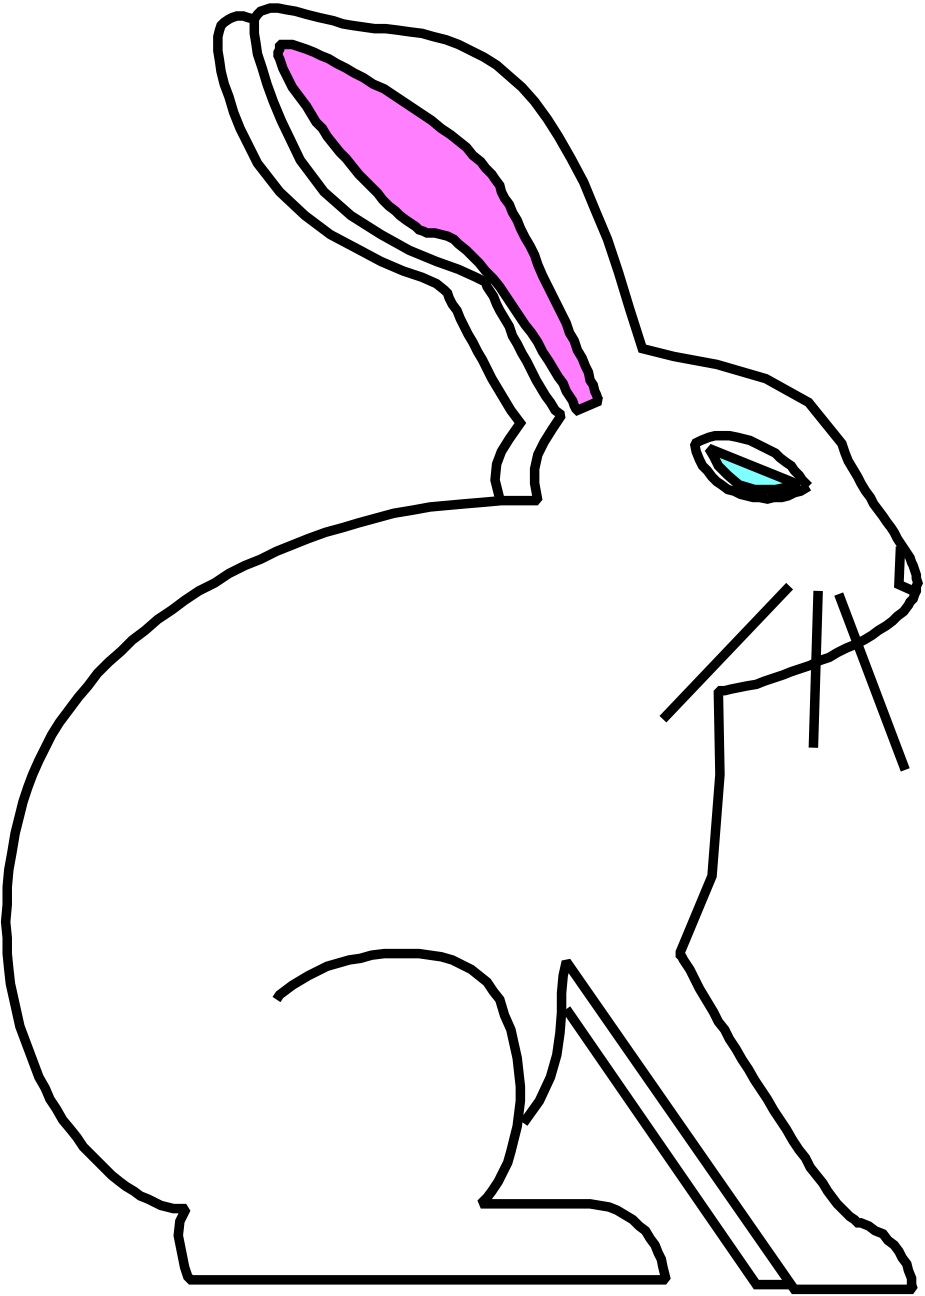 Pictures Of Cartoon Rabbits - ClipArt Best